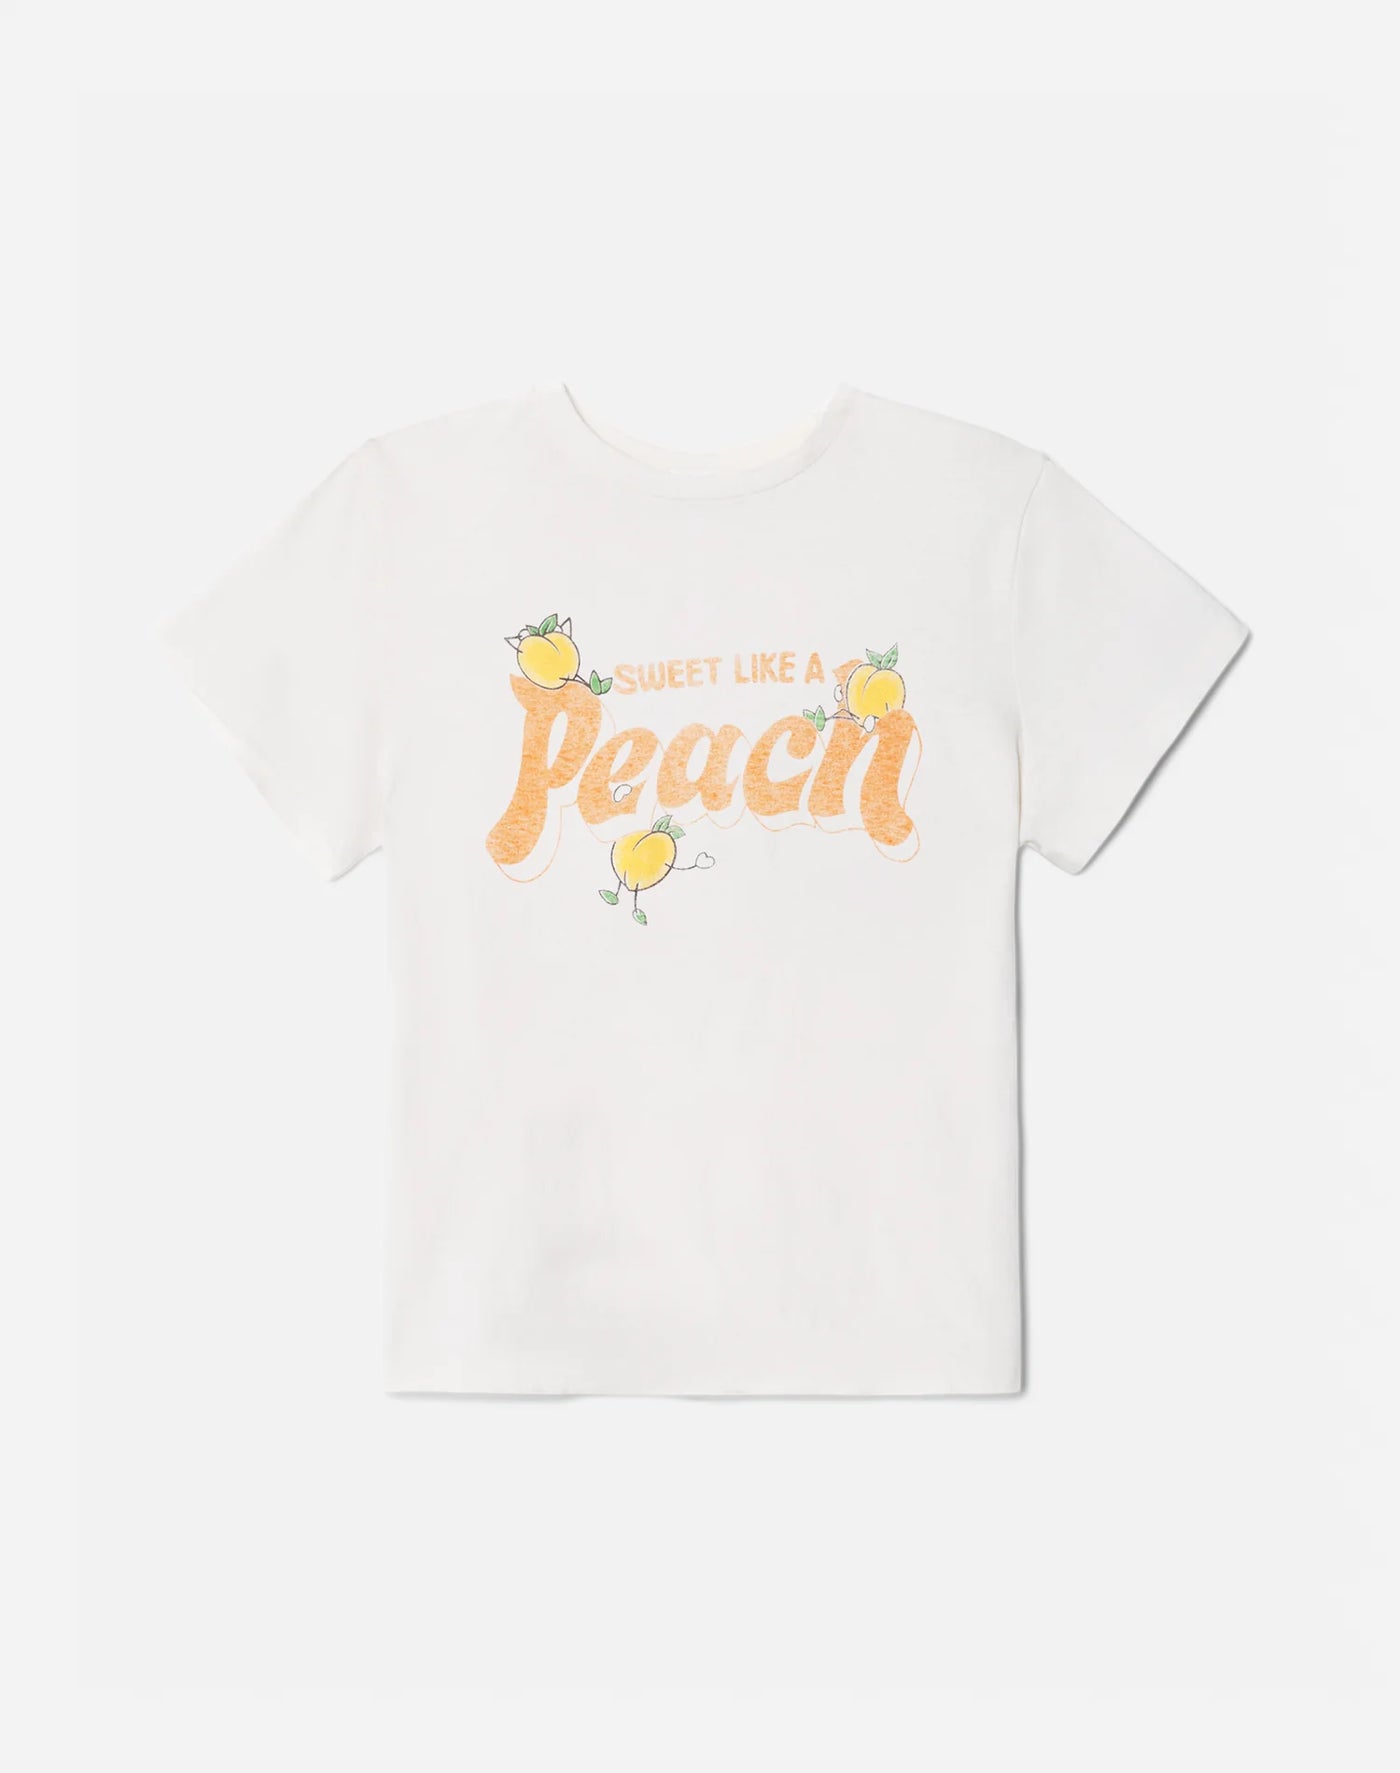 CLASSIC PEACH TEE IN VINTAGE WHITE - Romi Boutique